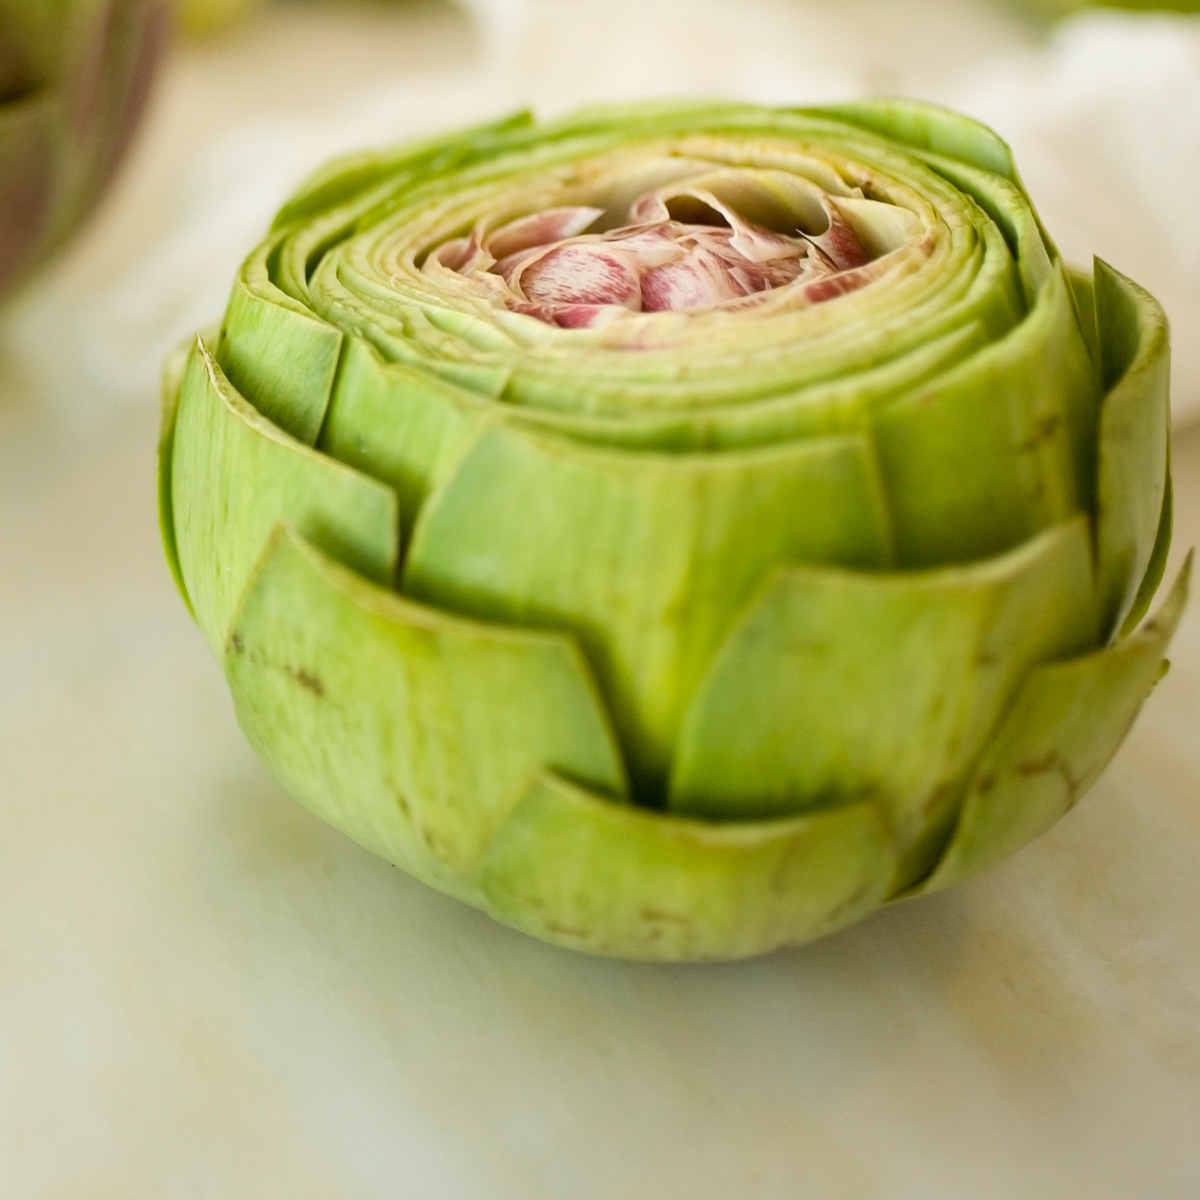 #Artichoke Alleviates Symptoms and Improves the Quality of Life in Patients with #FunctionalDyspepsia (FD), Researchers say kylejnorton.blogspot.com/2023/06/artich…